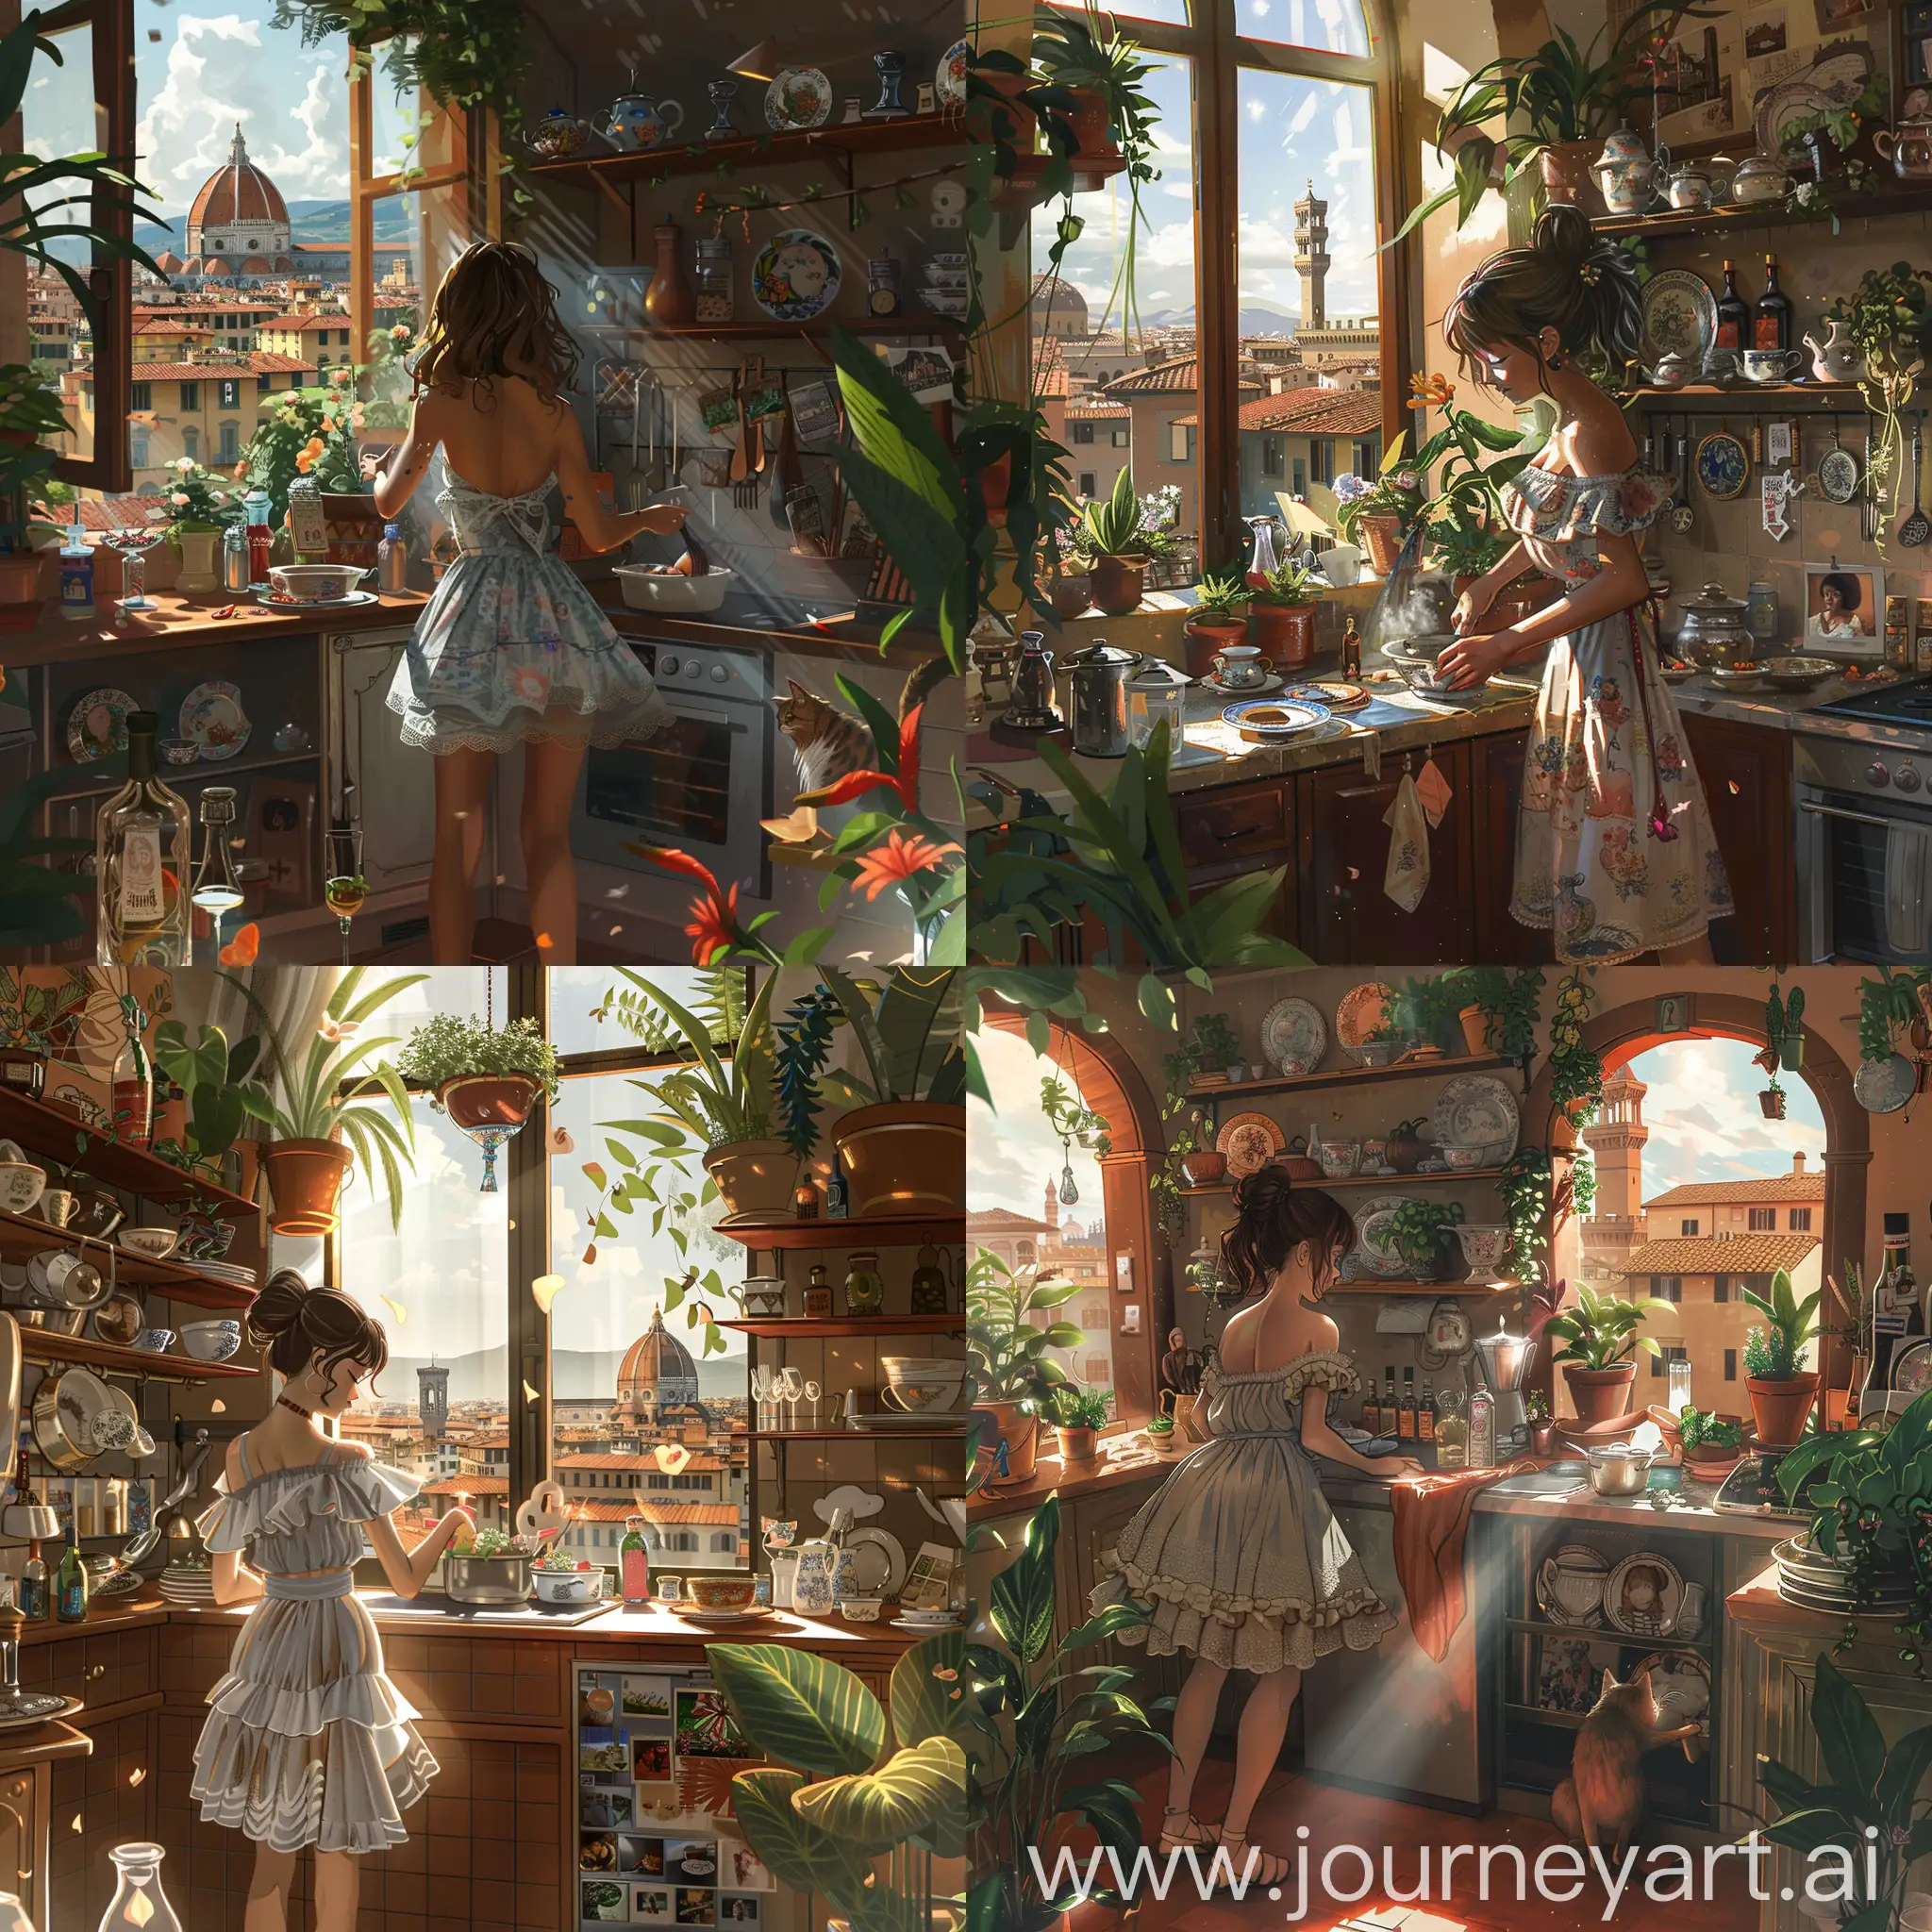 "Anime, hyperrealistic scene of a stylish French girl in a flowy top cooking in a kitchen among lush plants and flowers, overlooking the terracotta rooftops of Florence. Sunlight streams through the windows, illuminating the scene. A playful cat swats at something nearby, adding a touch of whimsy. The kitchen features china plates on shelves, a photo collage on the fridge, and decorated bottles and glasses. Inspired by Virgil Finlay and Miyazaki style." --ar 16:9 --v 6.0 --style raw --q 2